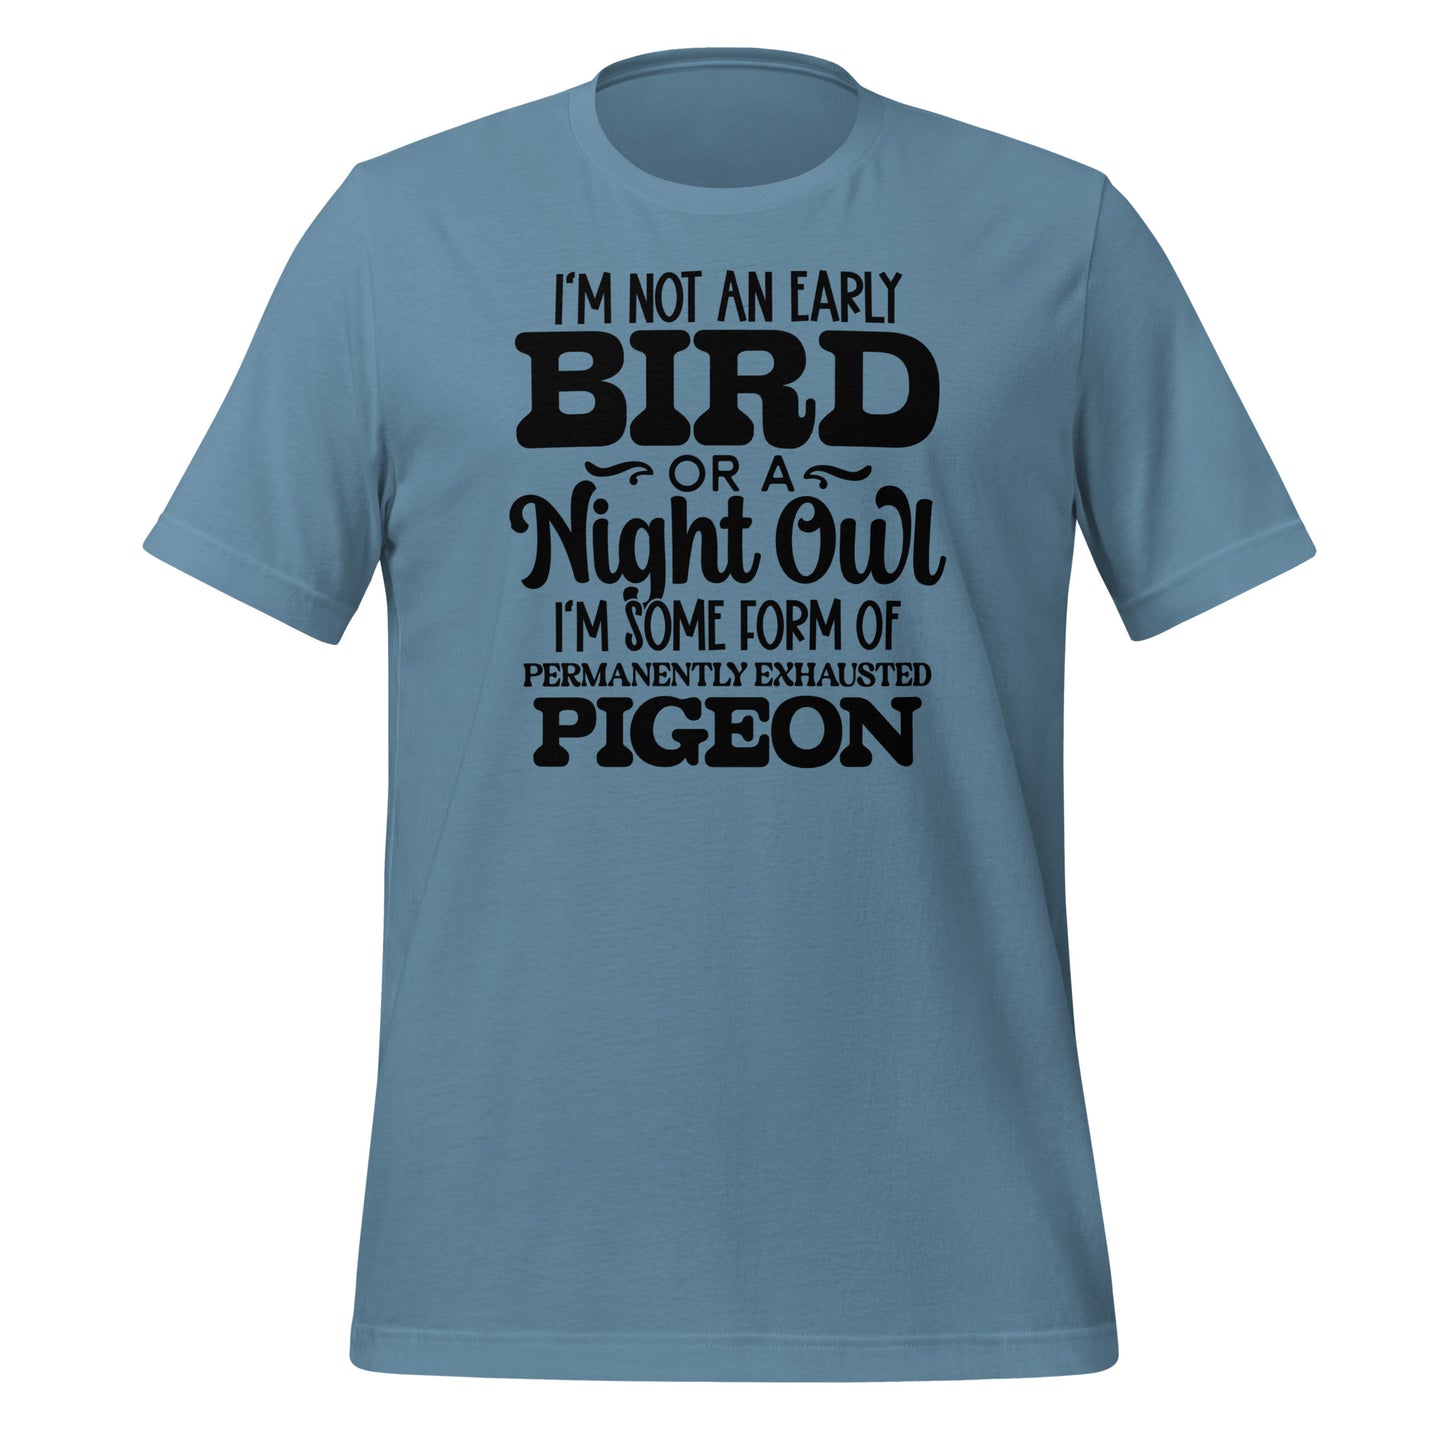 Permanently Exhausted Pigeon Tee: Casual Comfort with a Hint of Humor